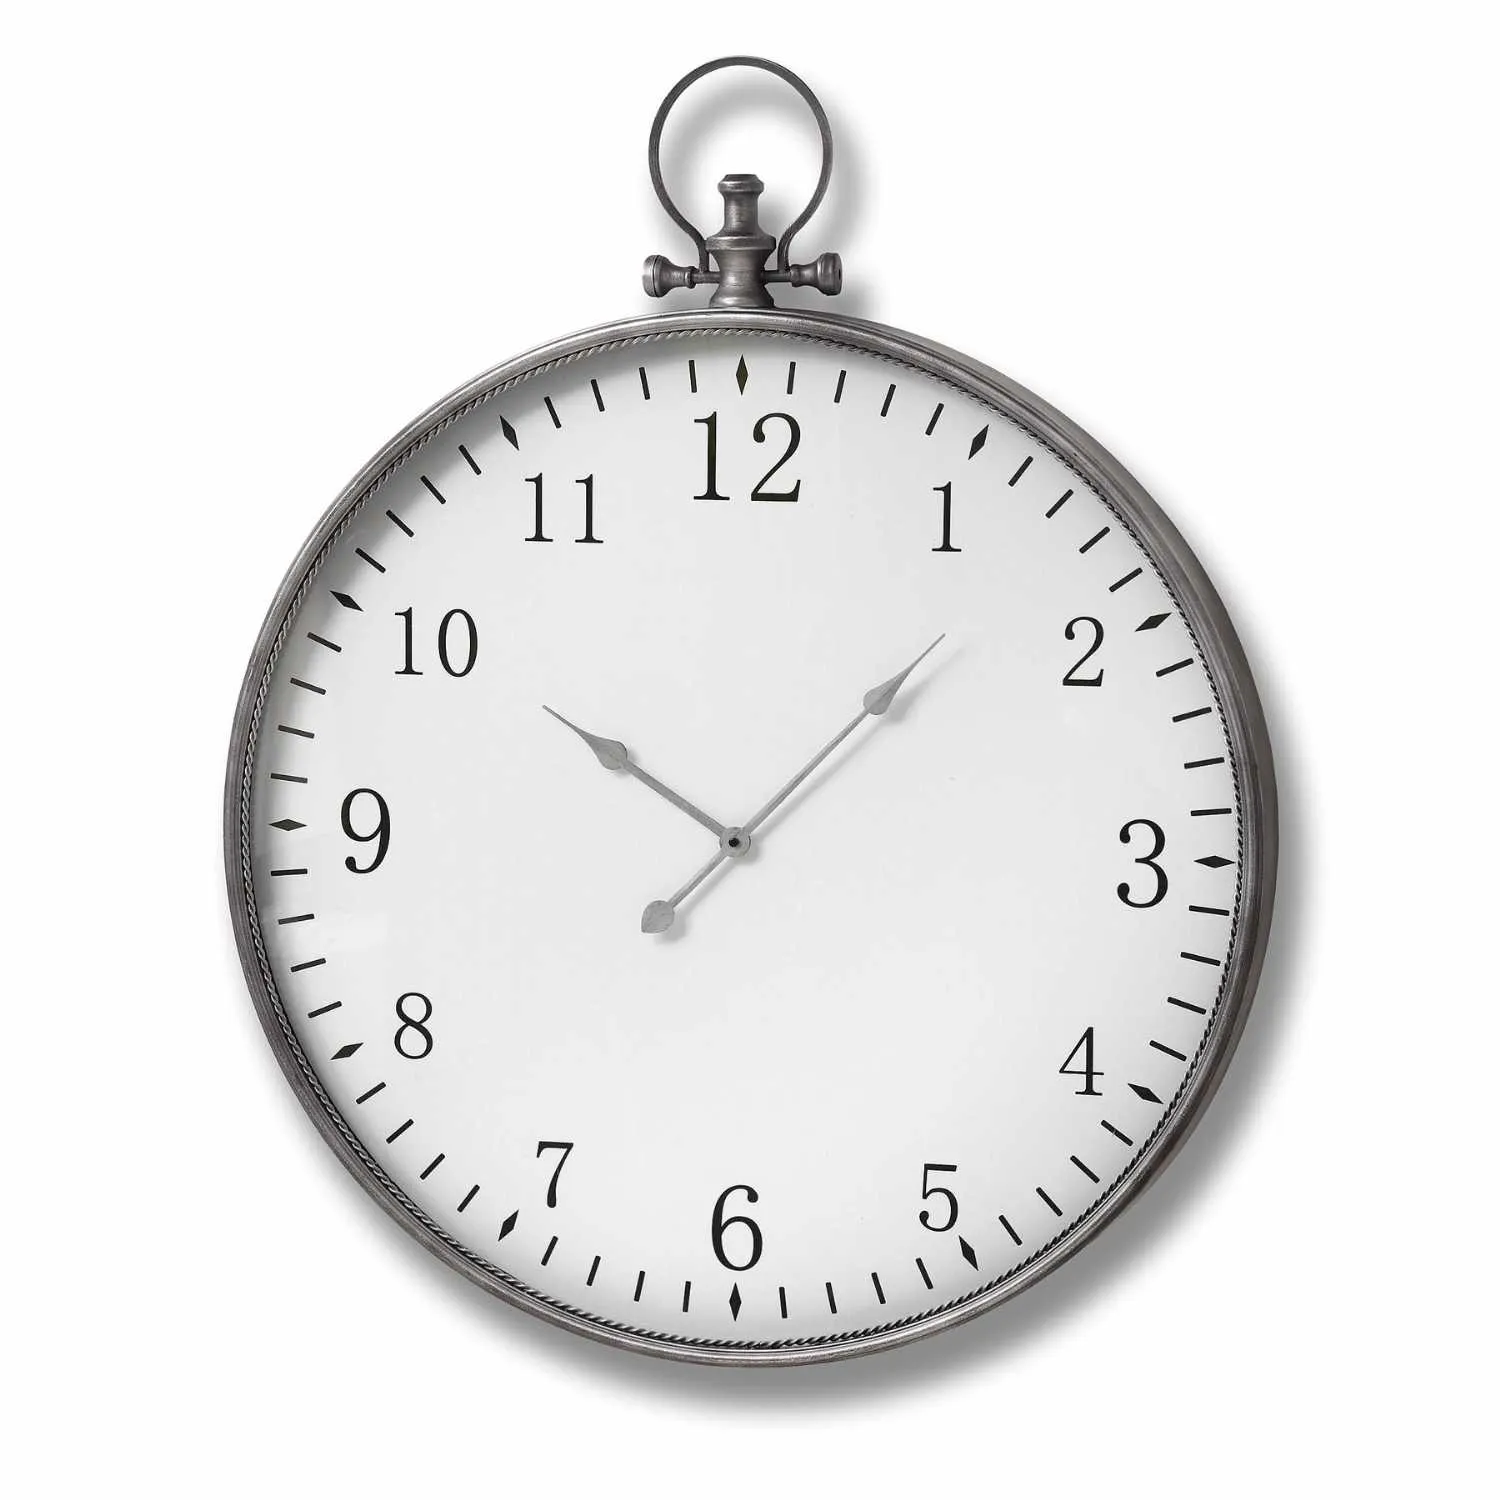 Silver Finished Metal Round Pocket Style Watch Wall Clock Transitional Glam Chic And Sleek